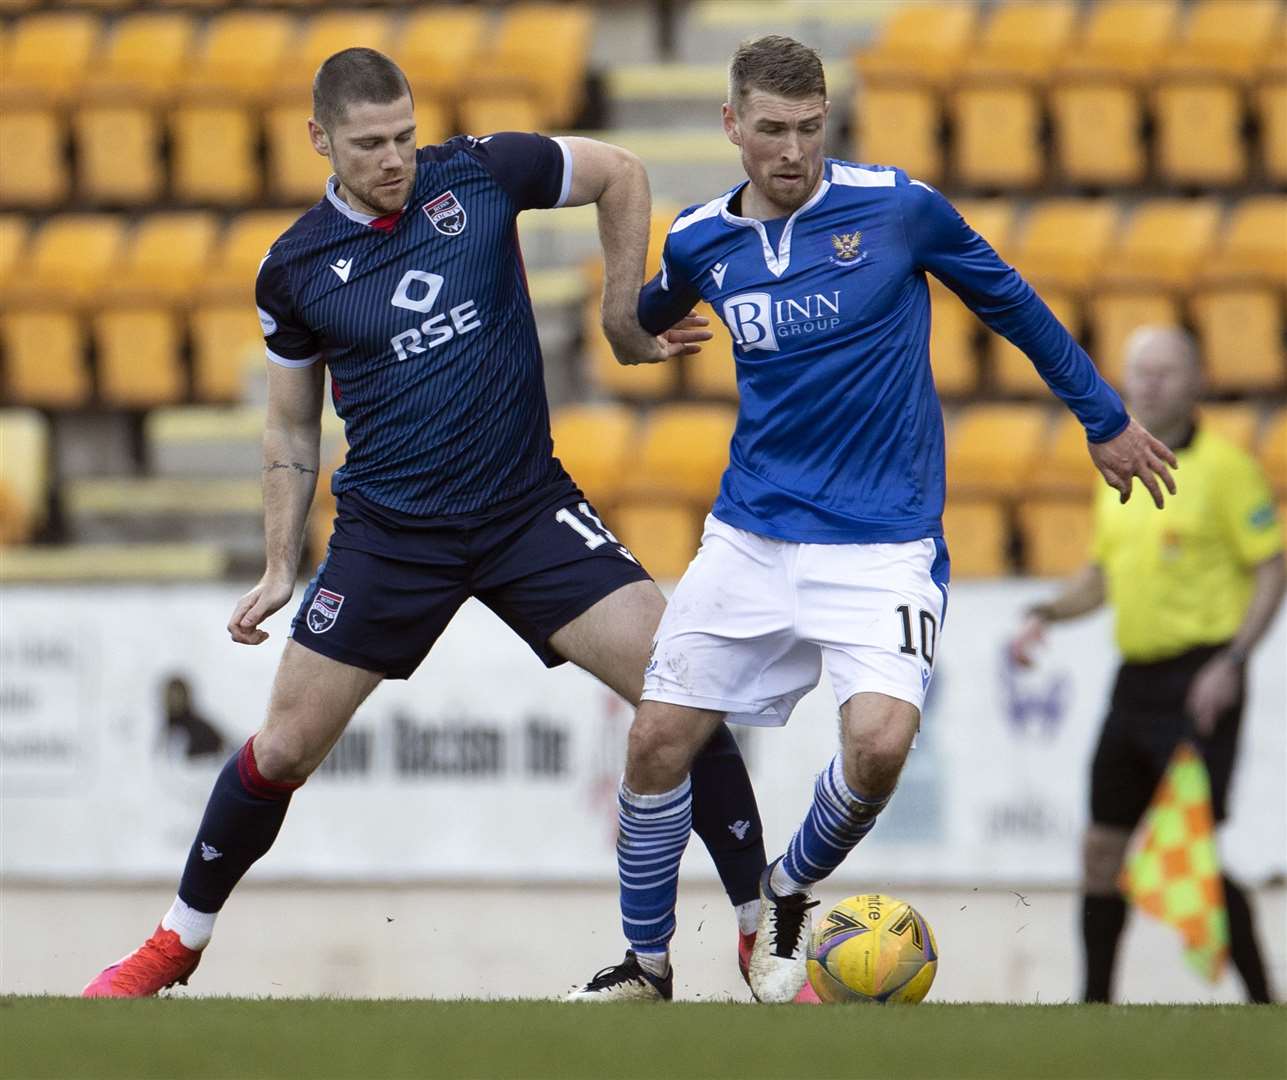 Ross County's Iain Vigurs and St Johnstone's David Wotherspoon tussle back in 2021